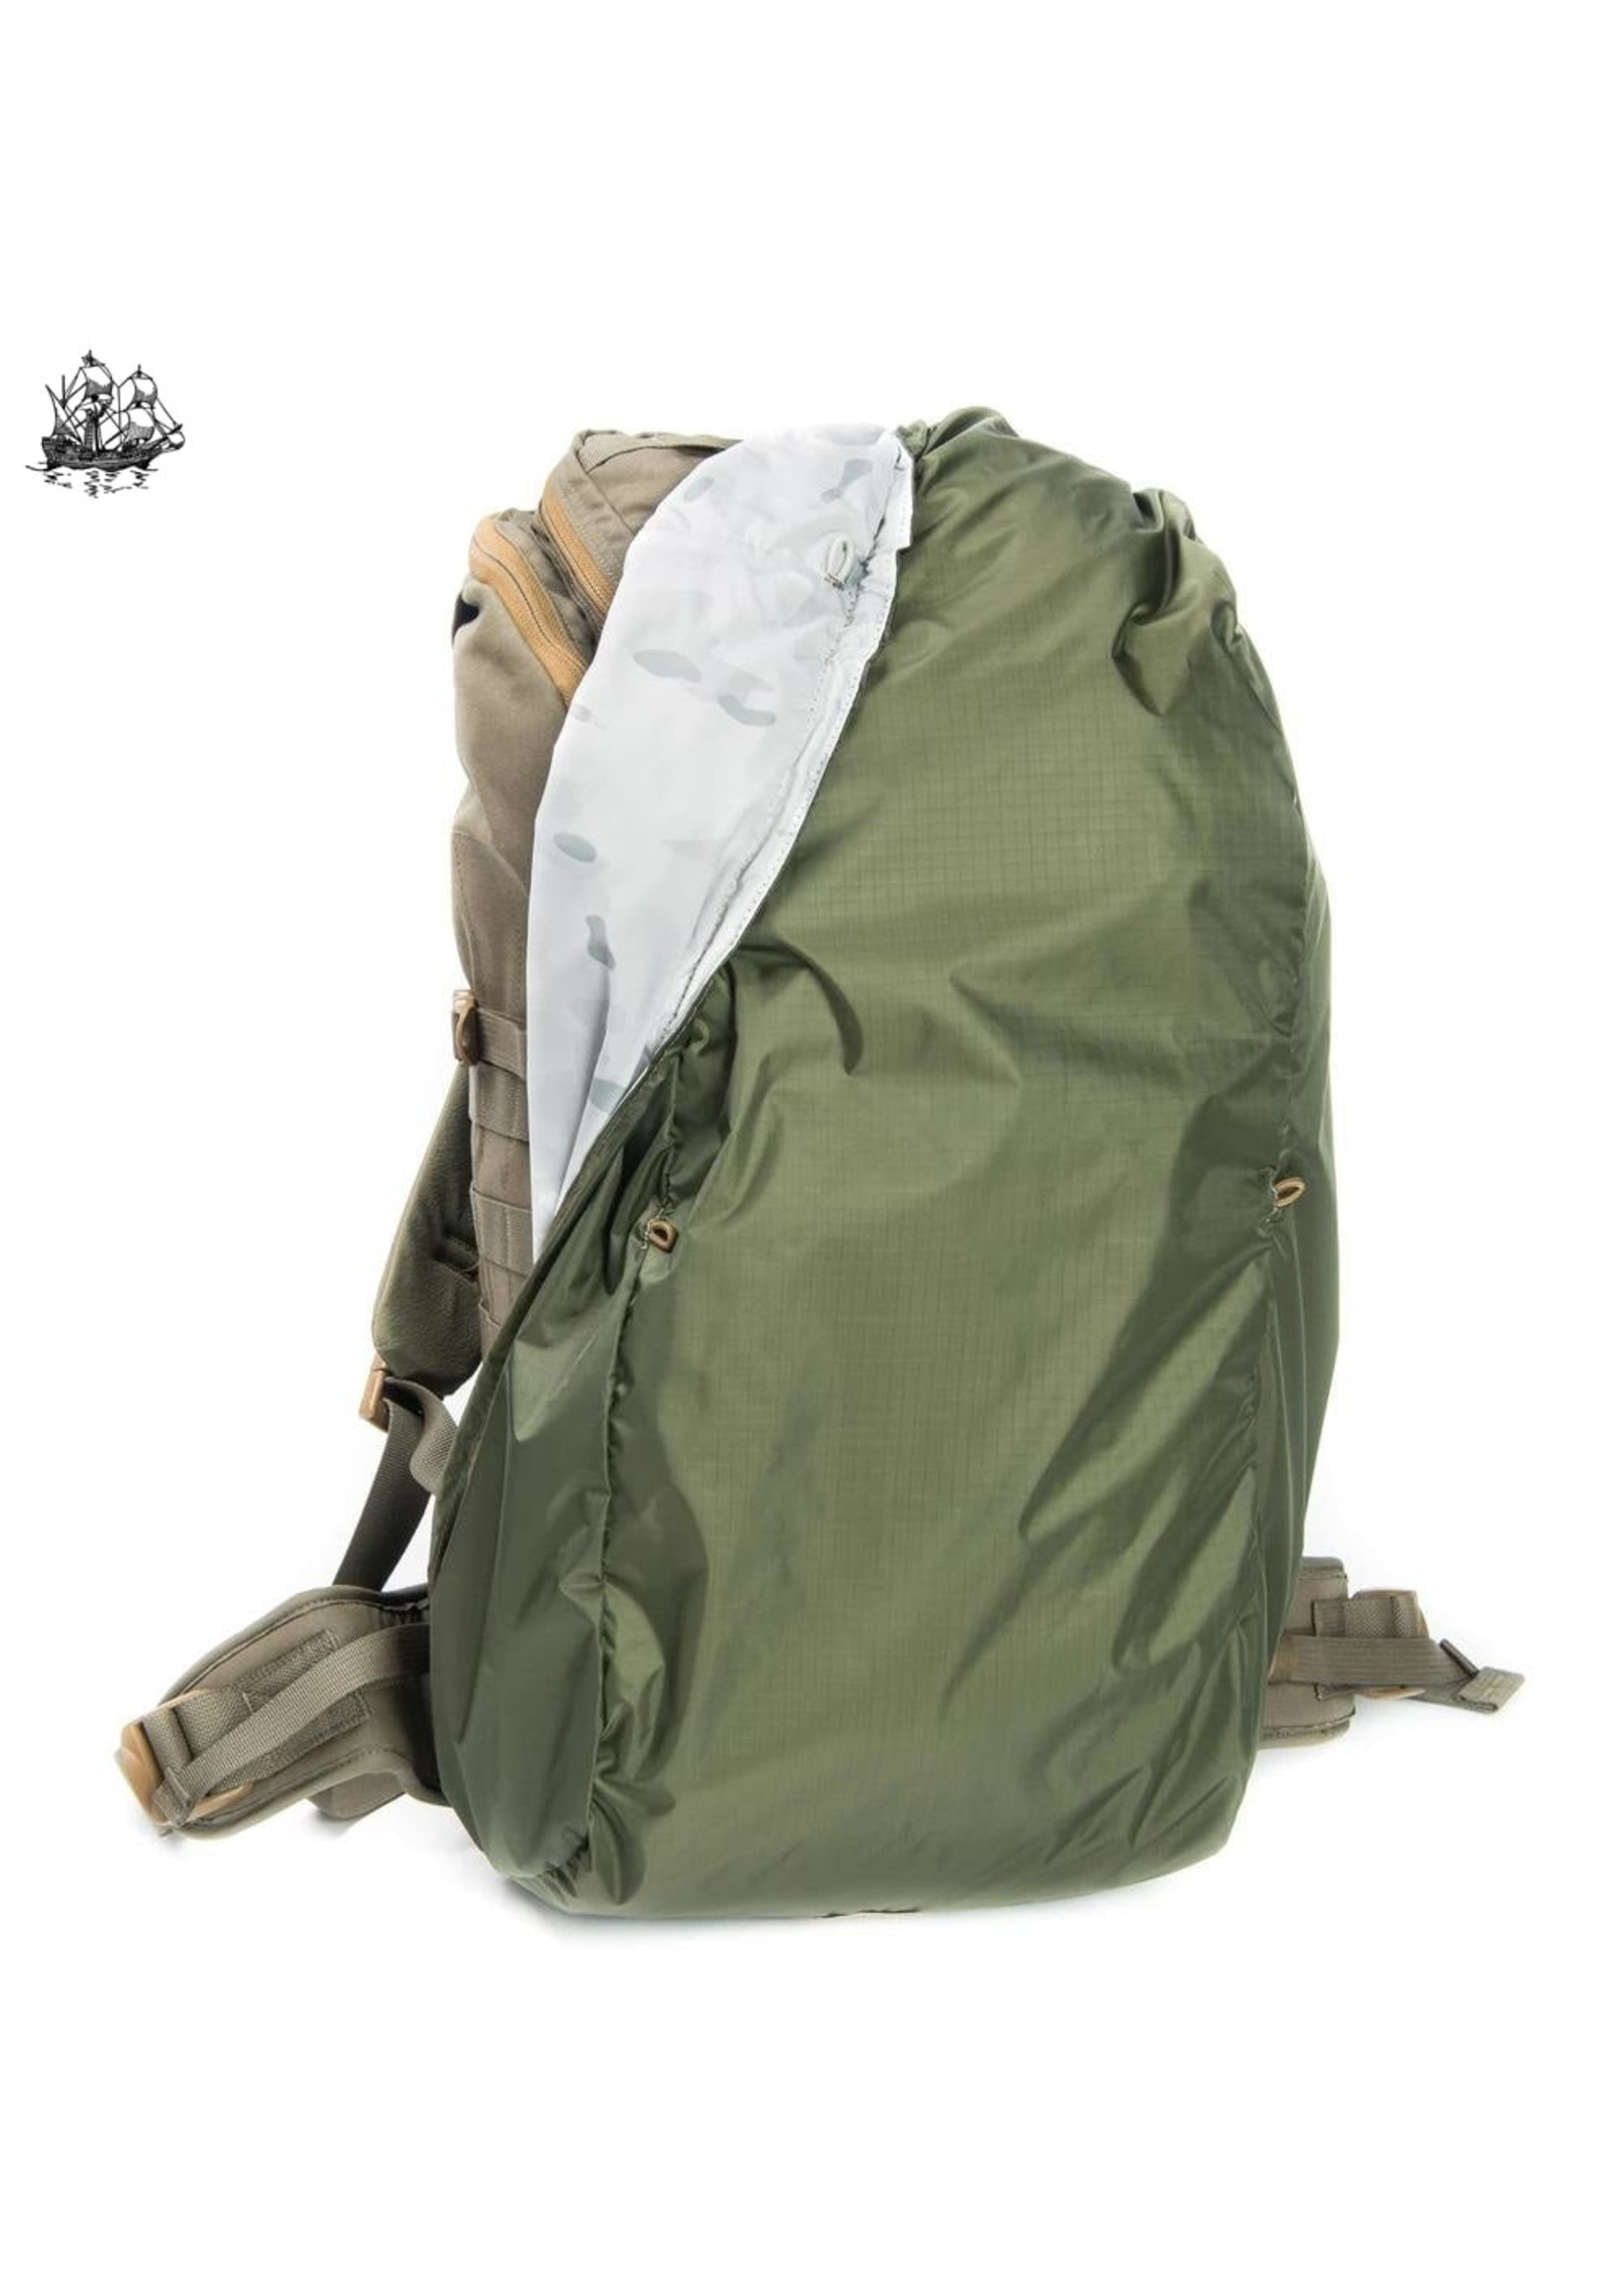 MAYFLOWER-RC 30L PACK COVER